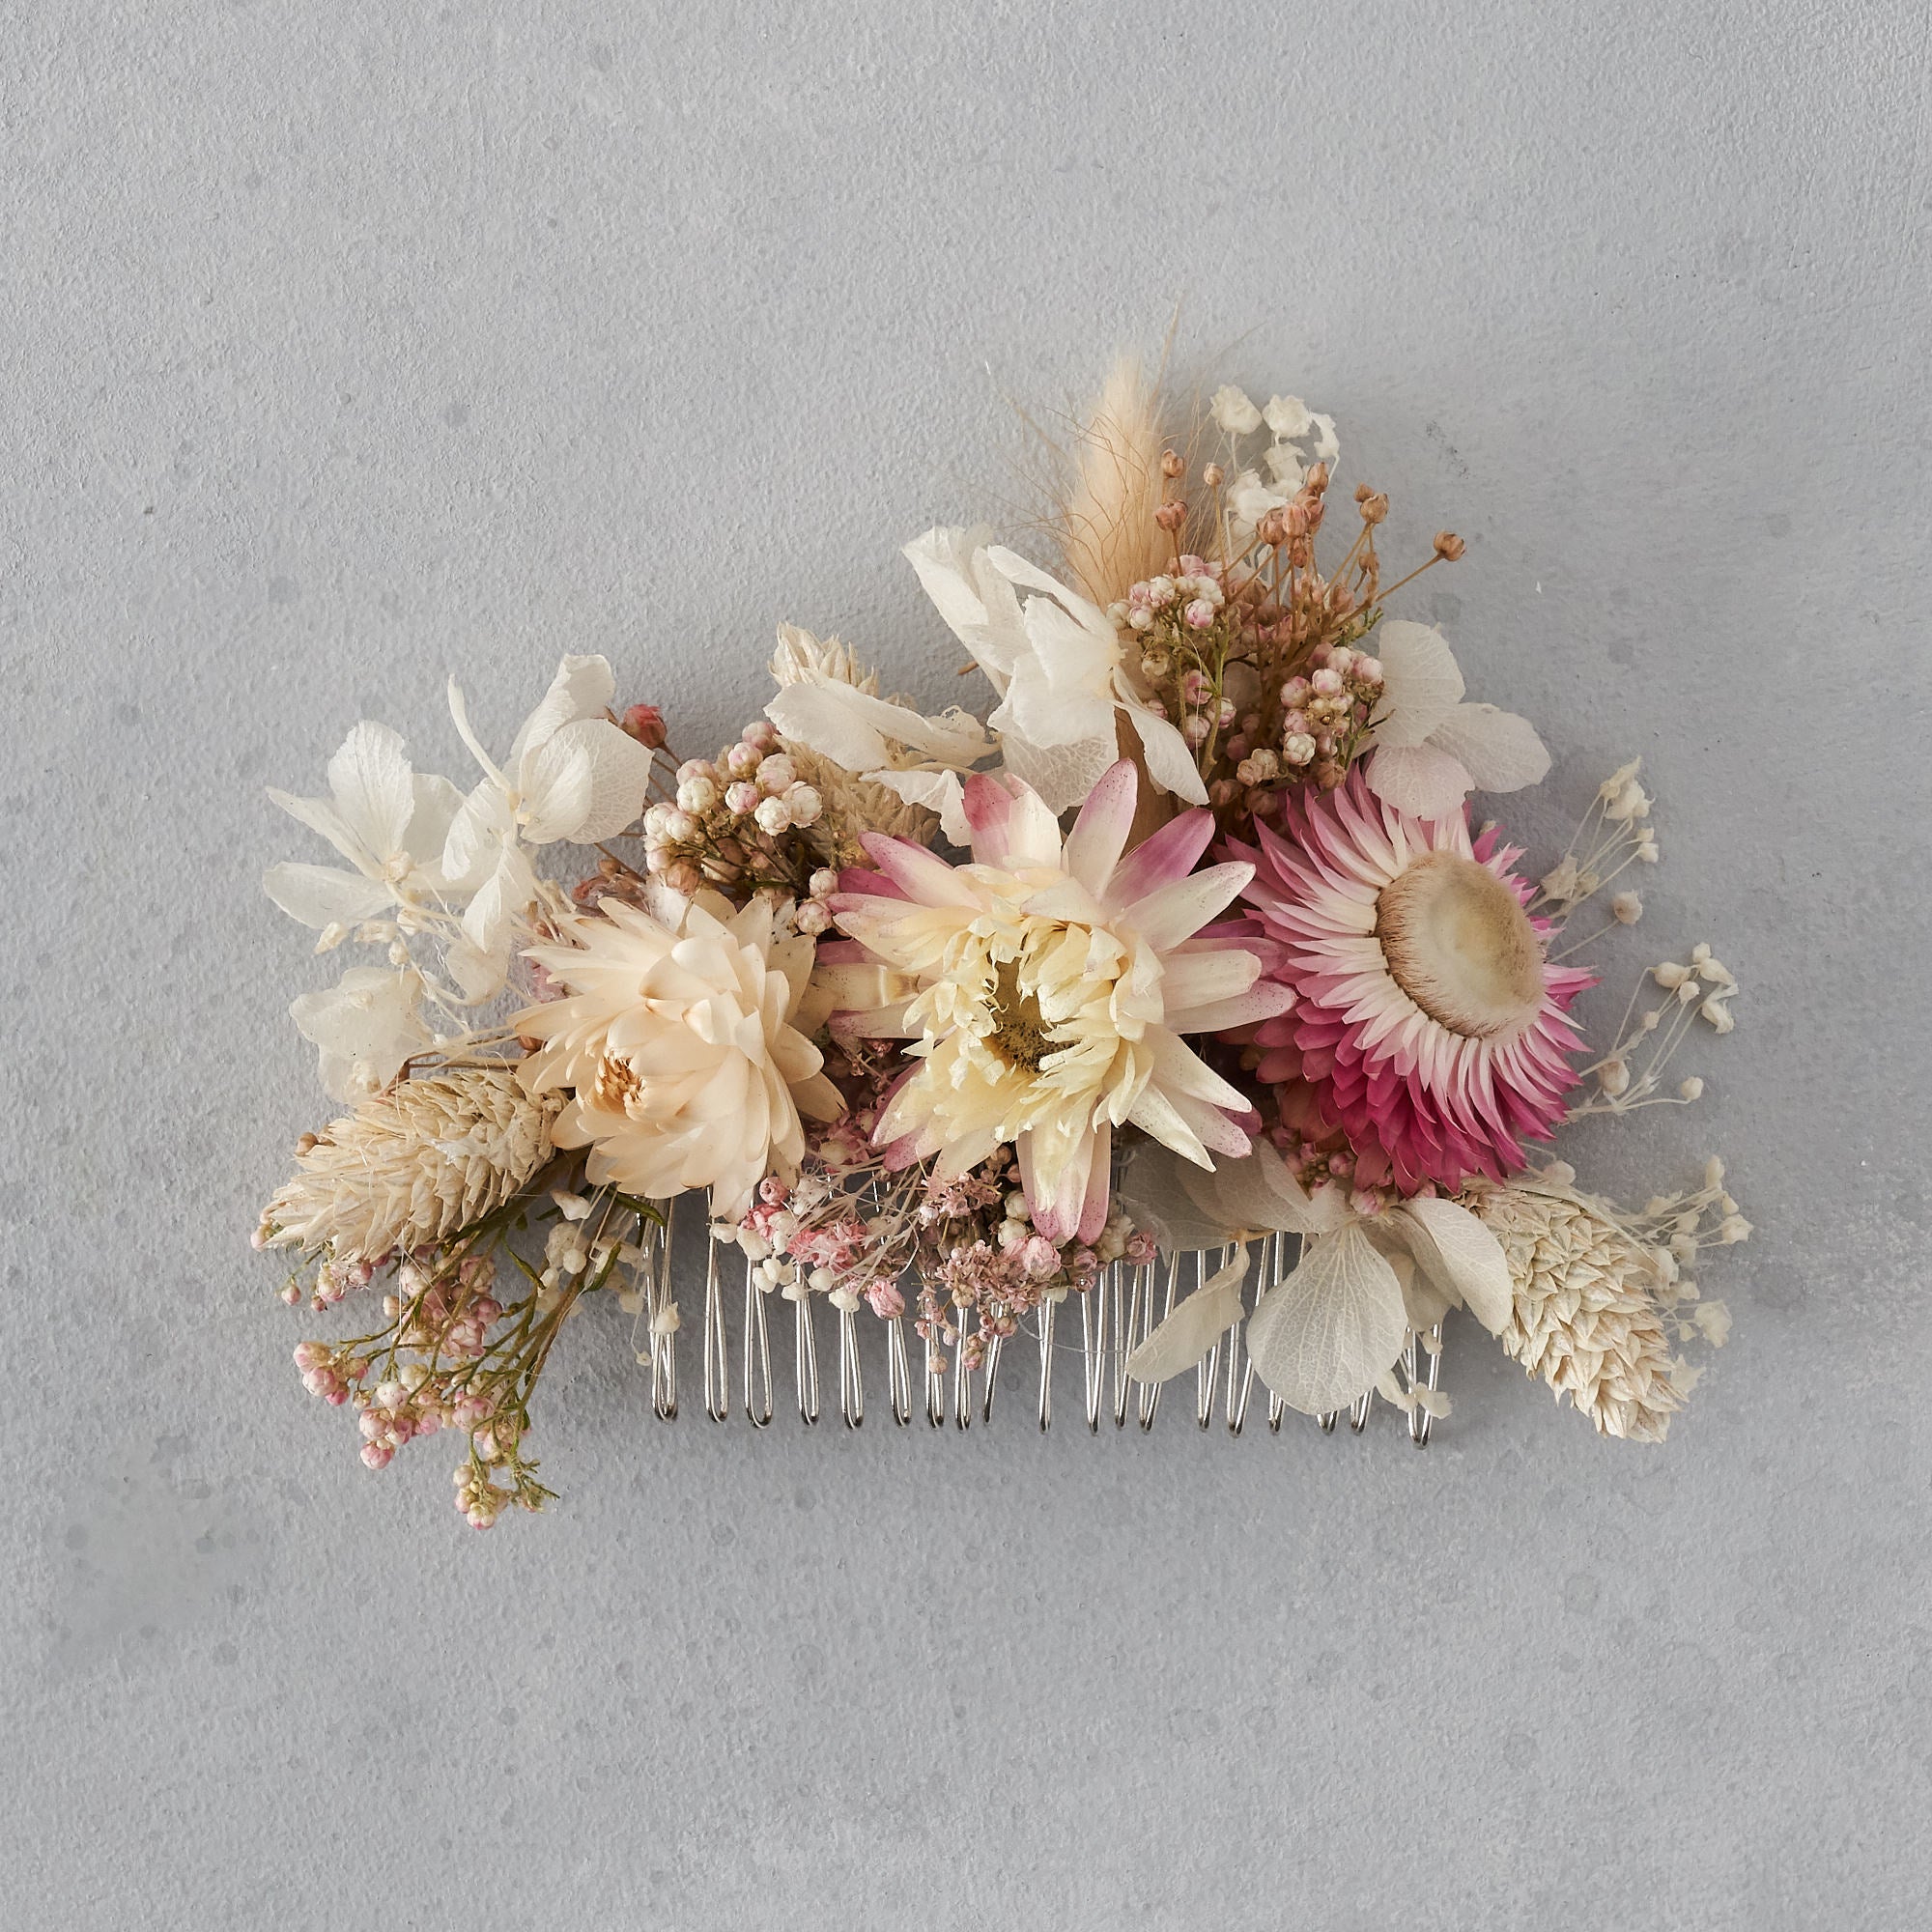 Dried flower hair comb : blush pink